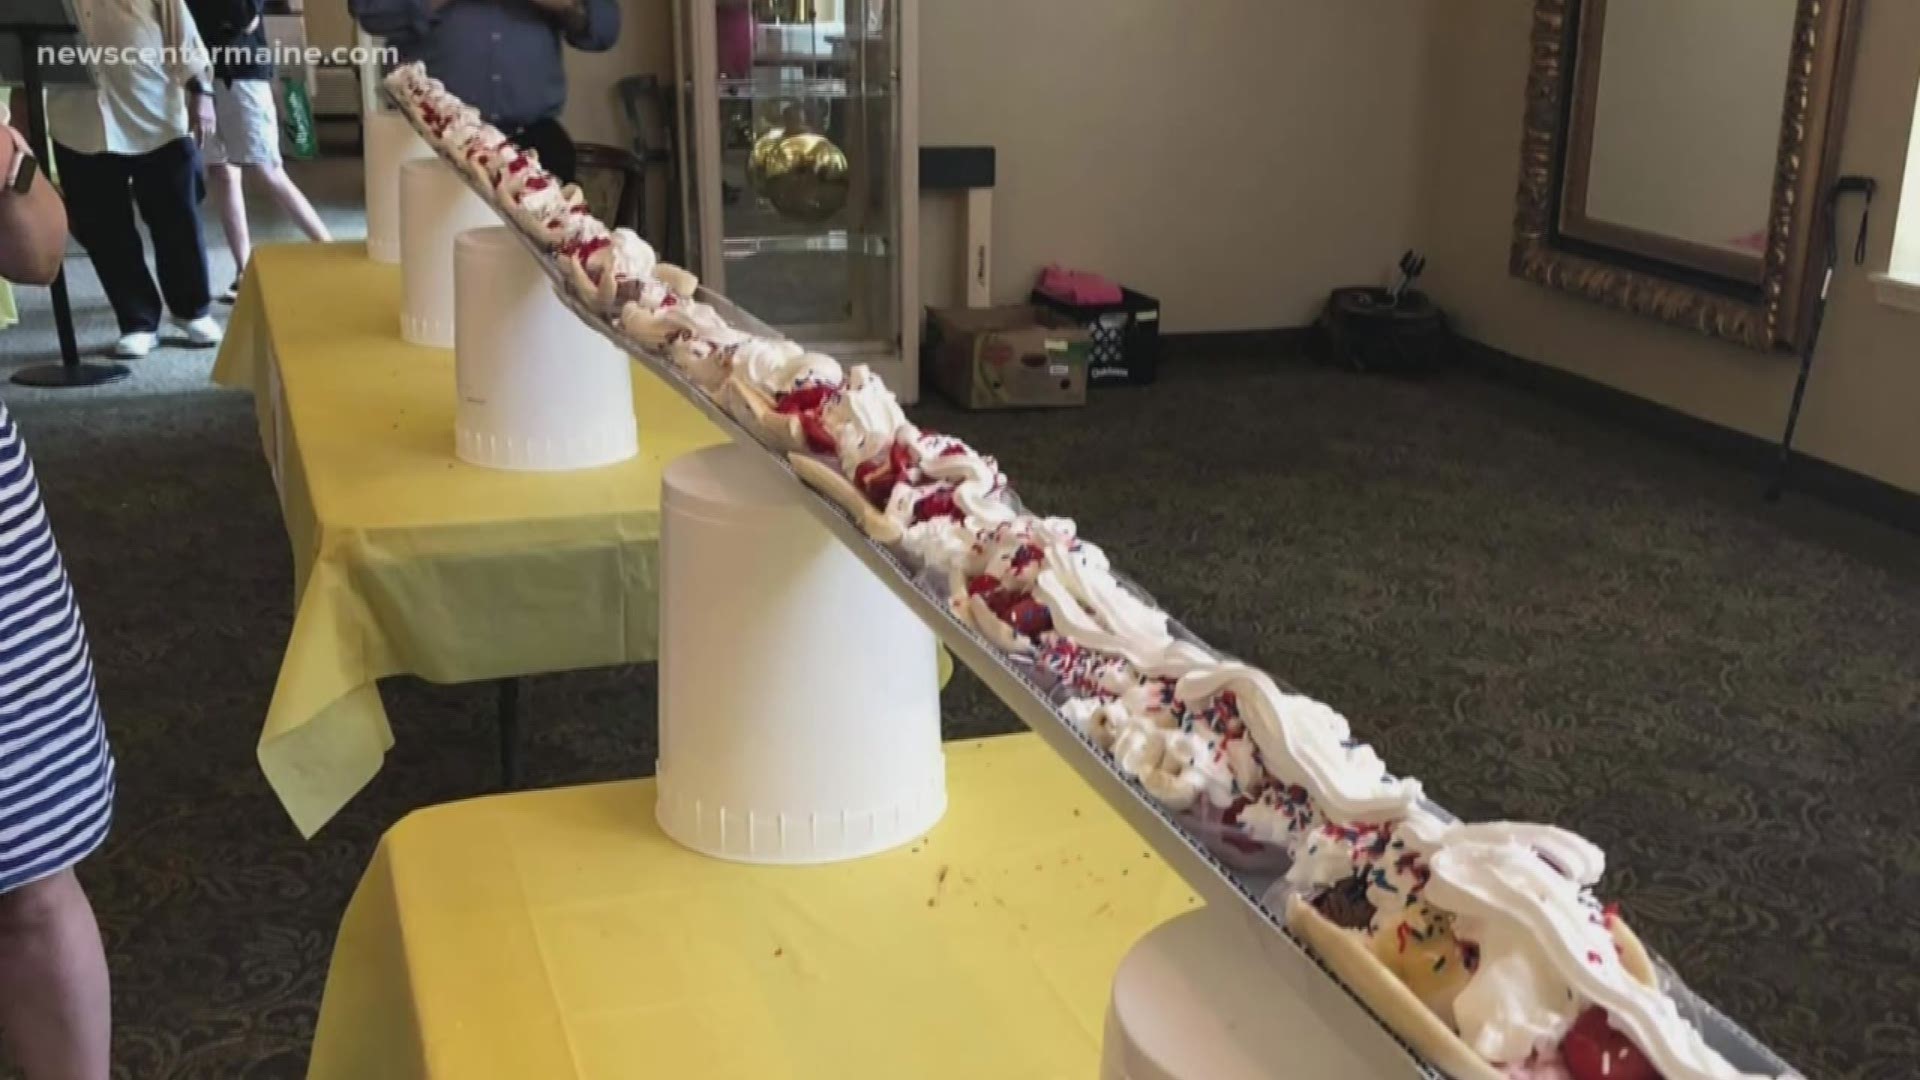 People met at the Woods at Canco to build the city's longest banana split.